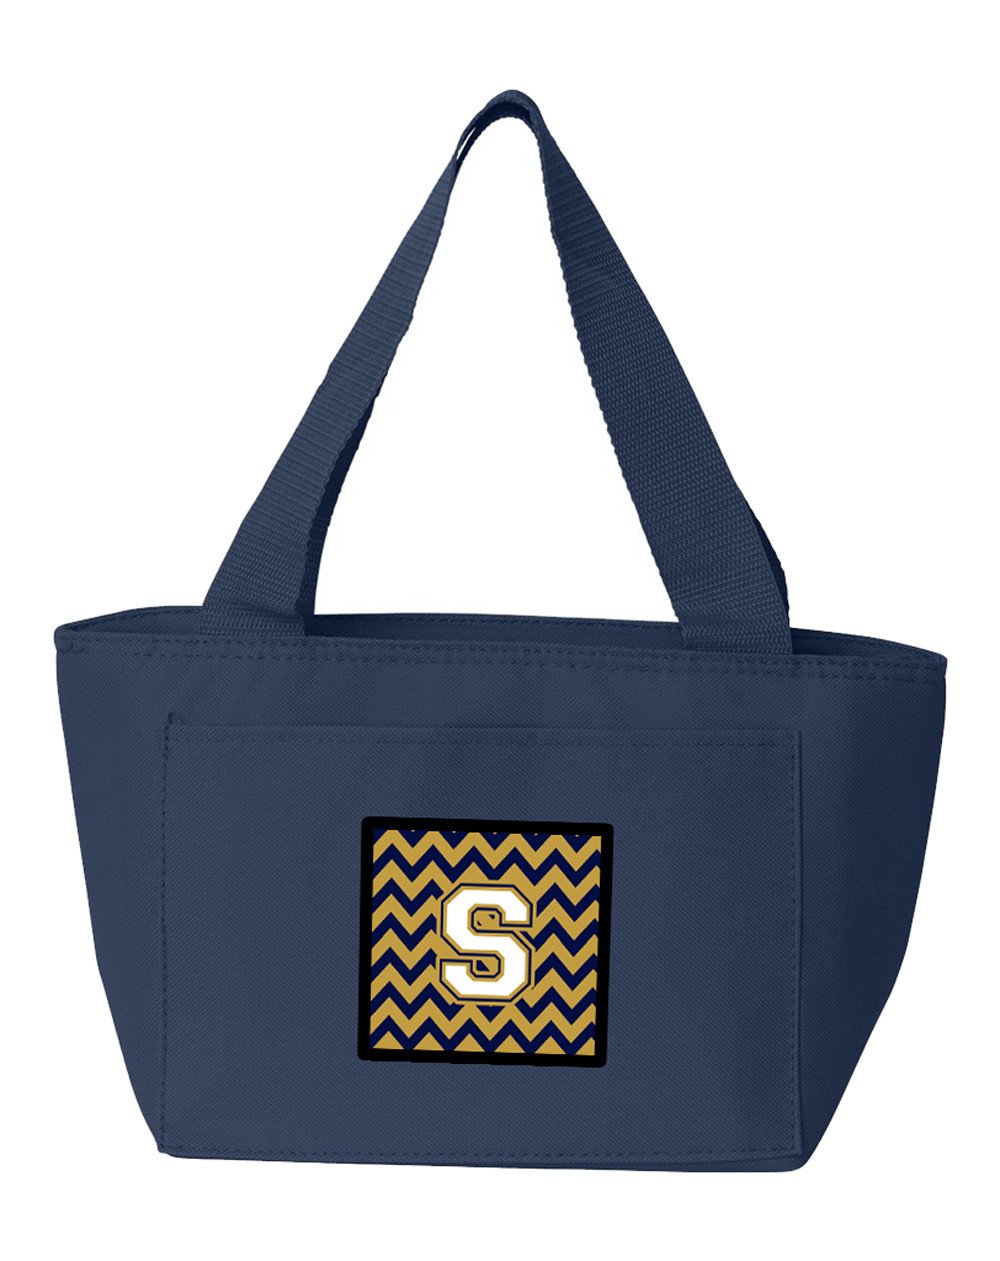 Letter S Chevron Navy Blue and Gold Lunch Bag CJ1057-SNA-8808 by Caroline's Treasures